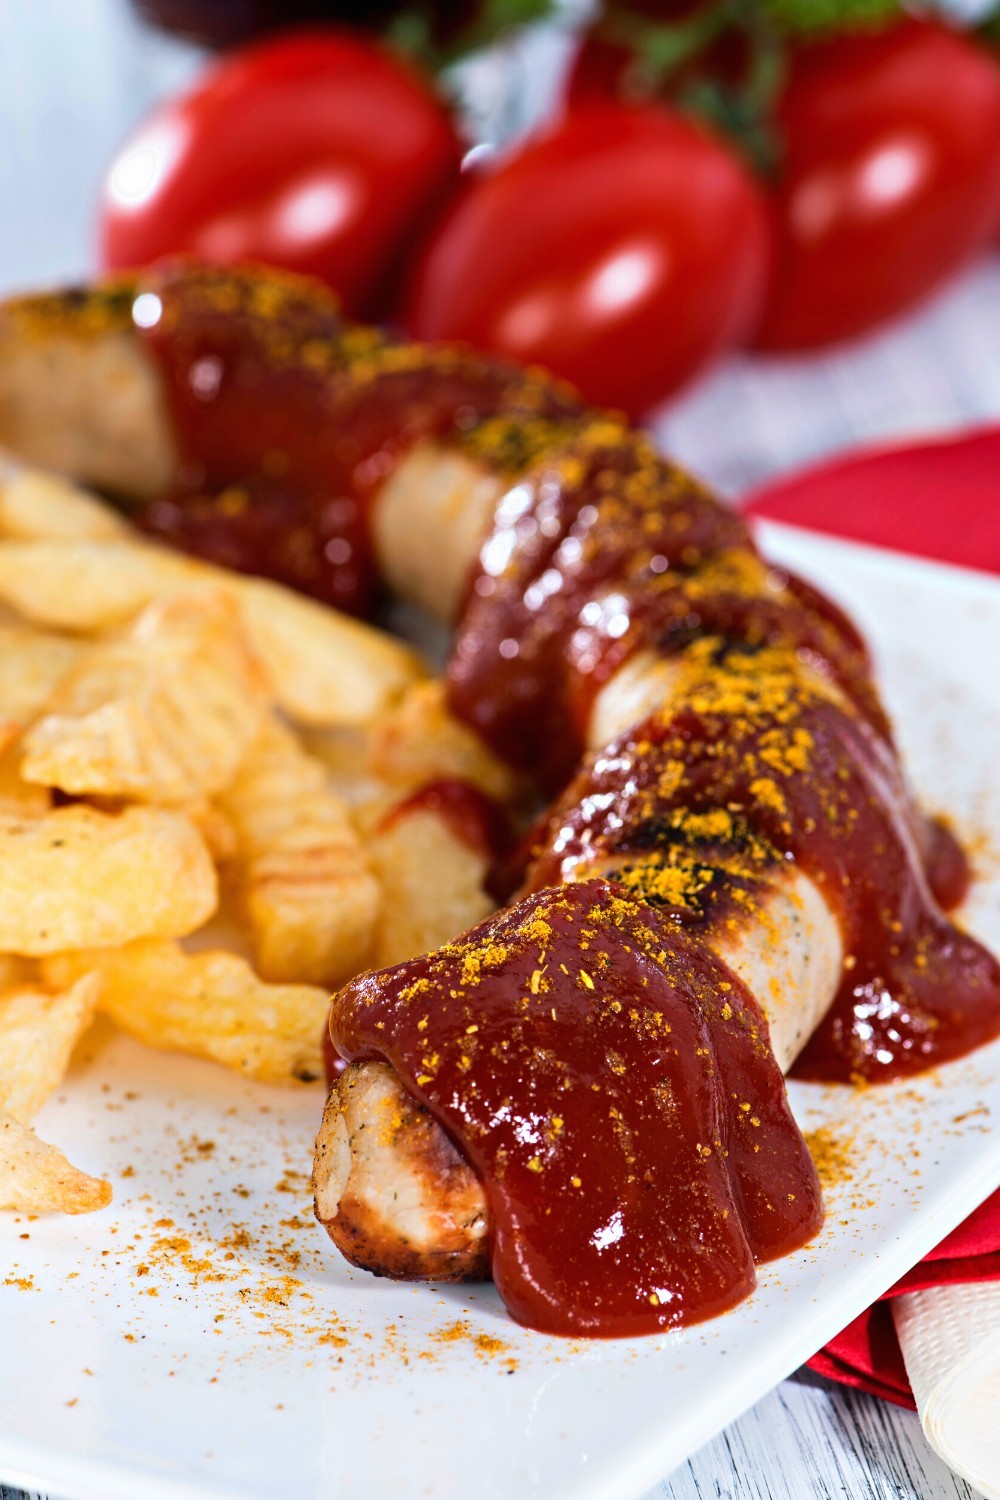 Famous Berliner Currywurst Recipe